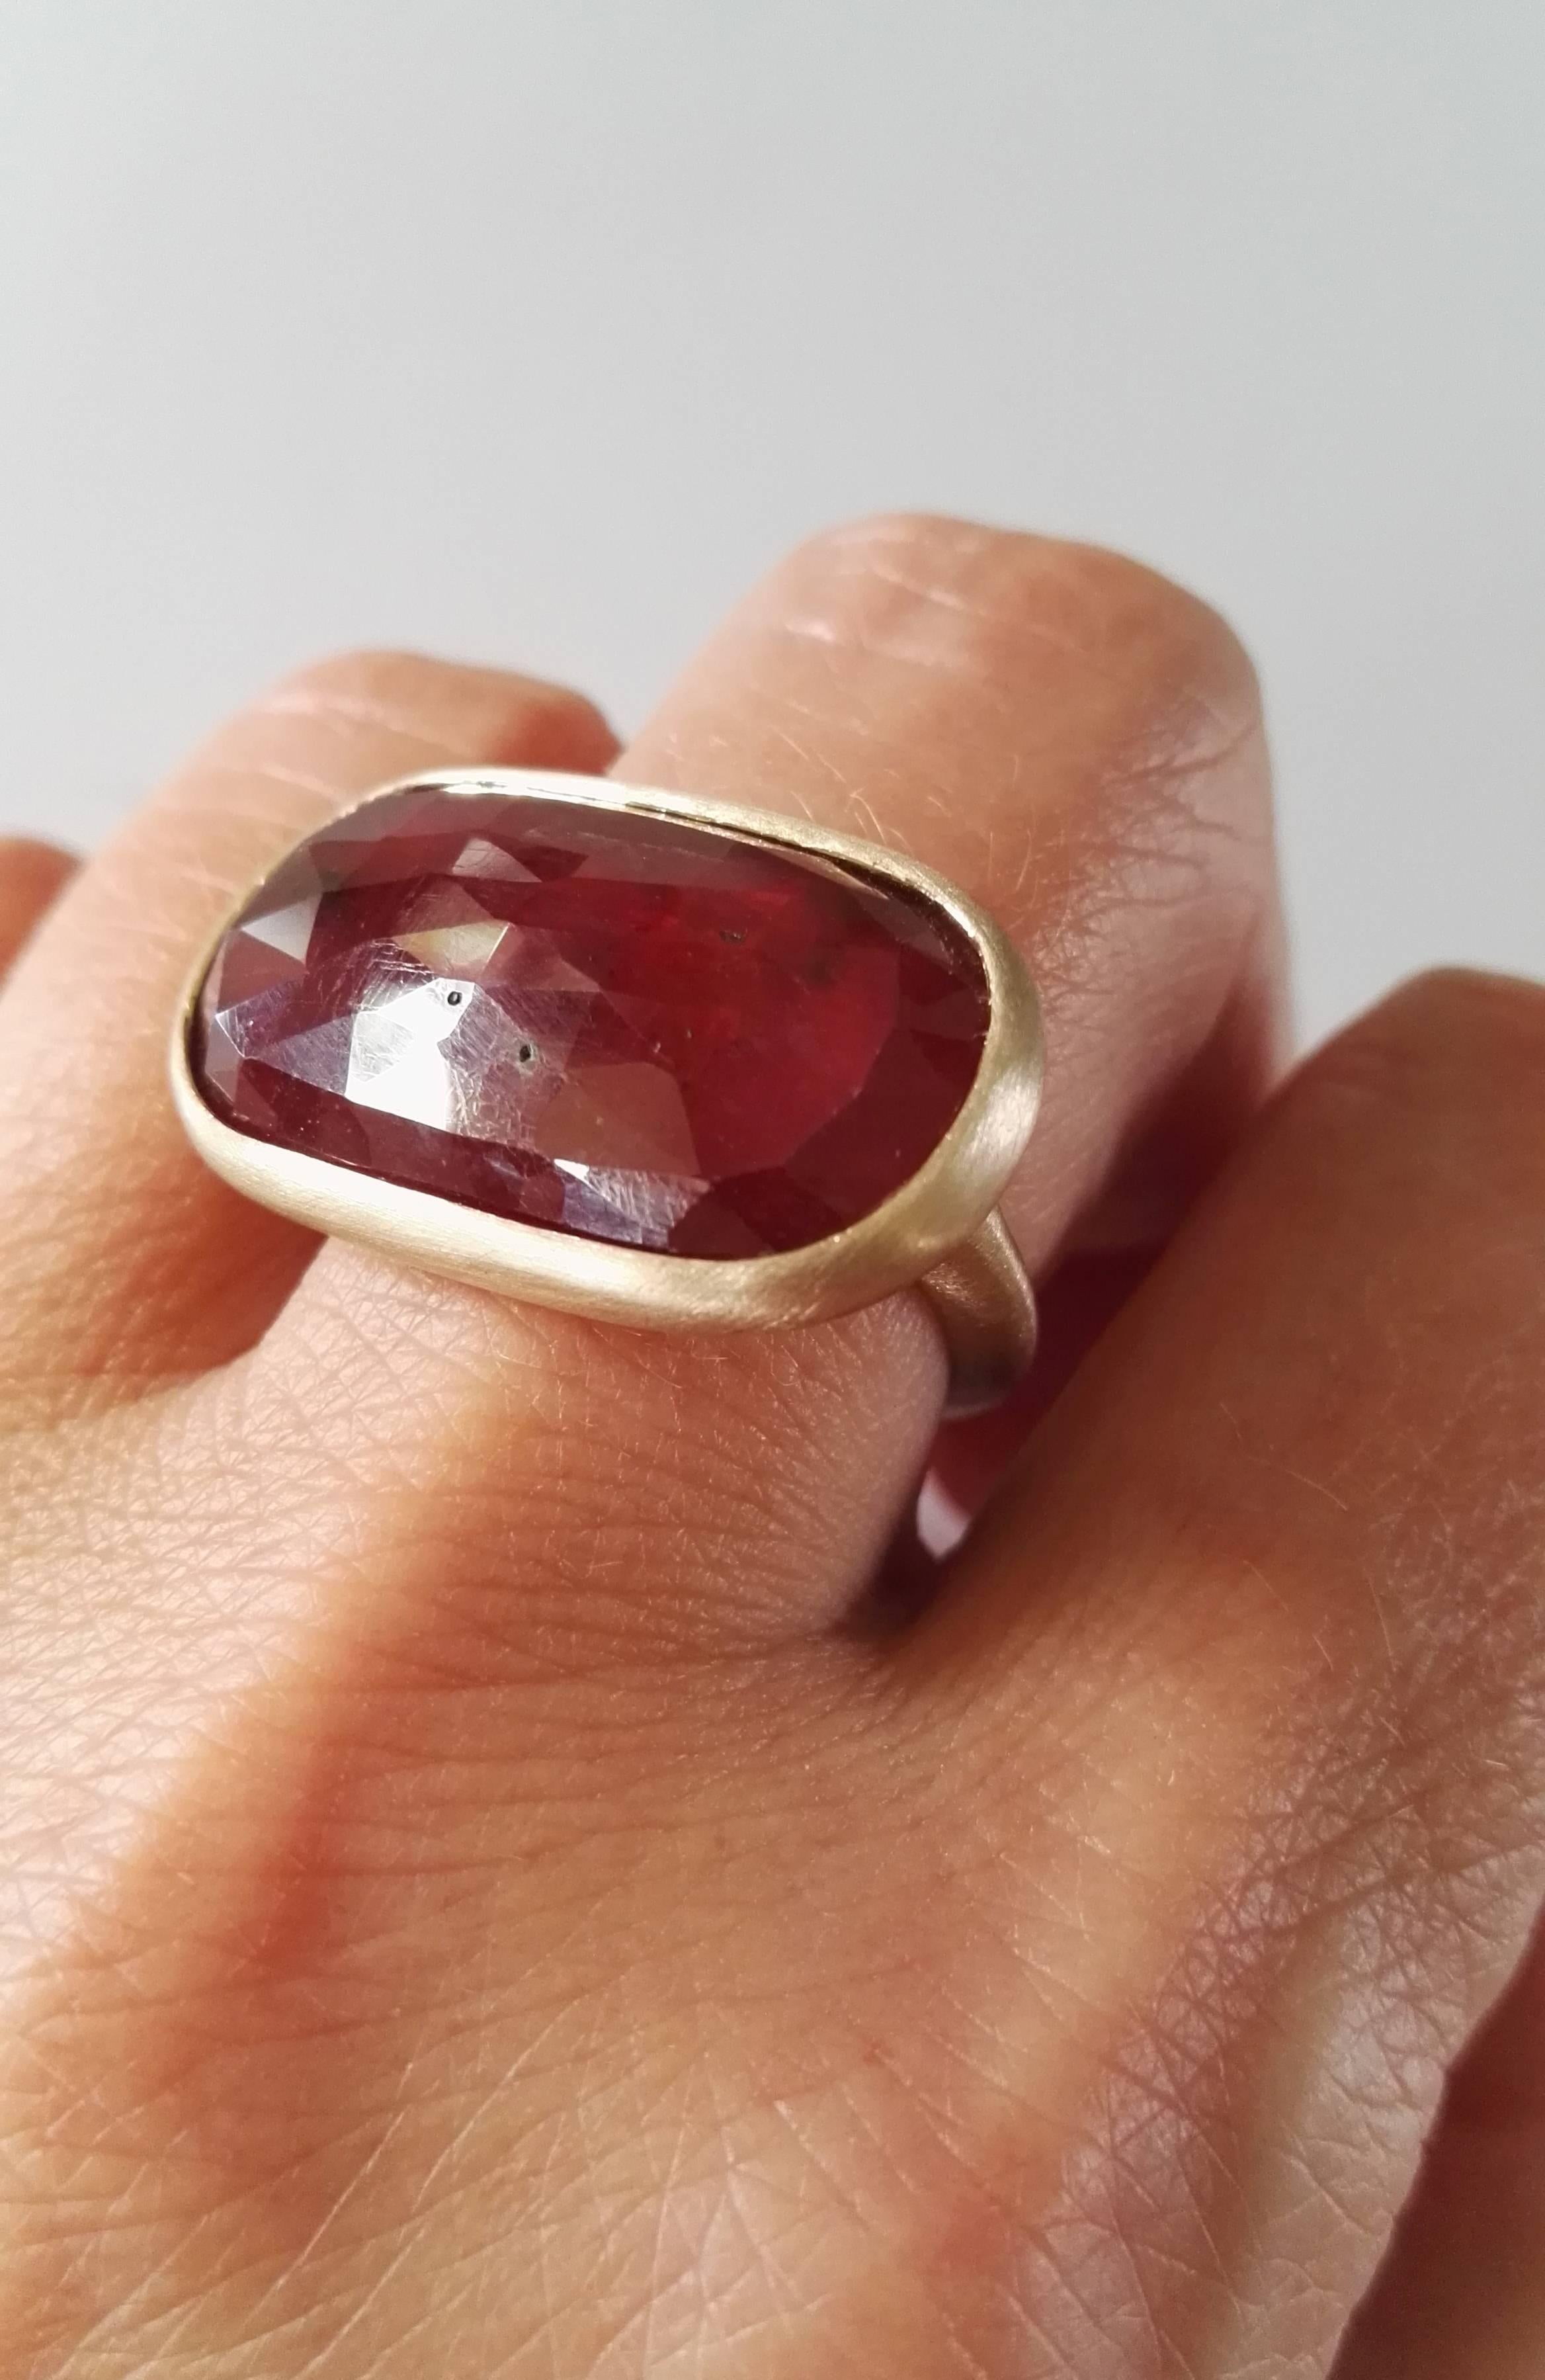 Dalben design one of a kind 18k white gold satin finishing ring with a 19.82 carat bezel-set faceted treated red sapphire.

 size 7 1/2 USA - 56 EU re-sizable to most finger sizes.
The Ring has been designed and handcrafted in our atelier in Italy